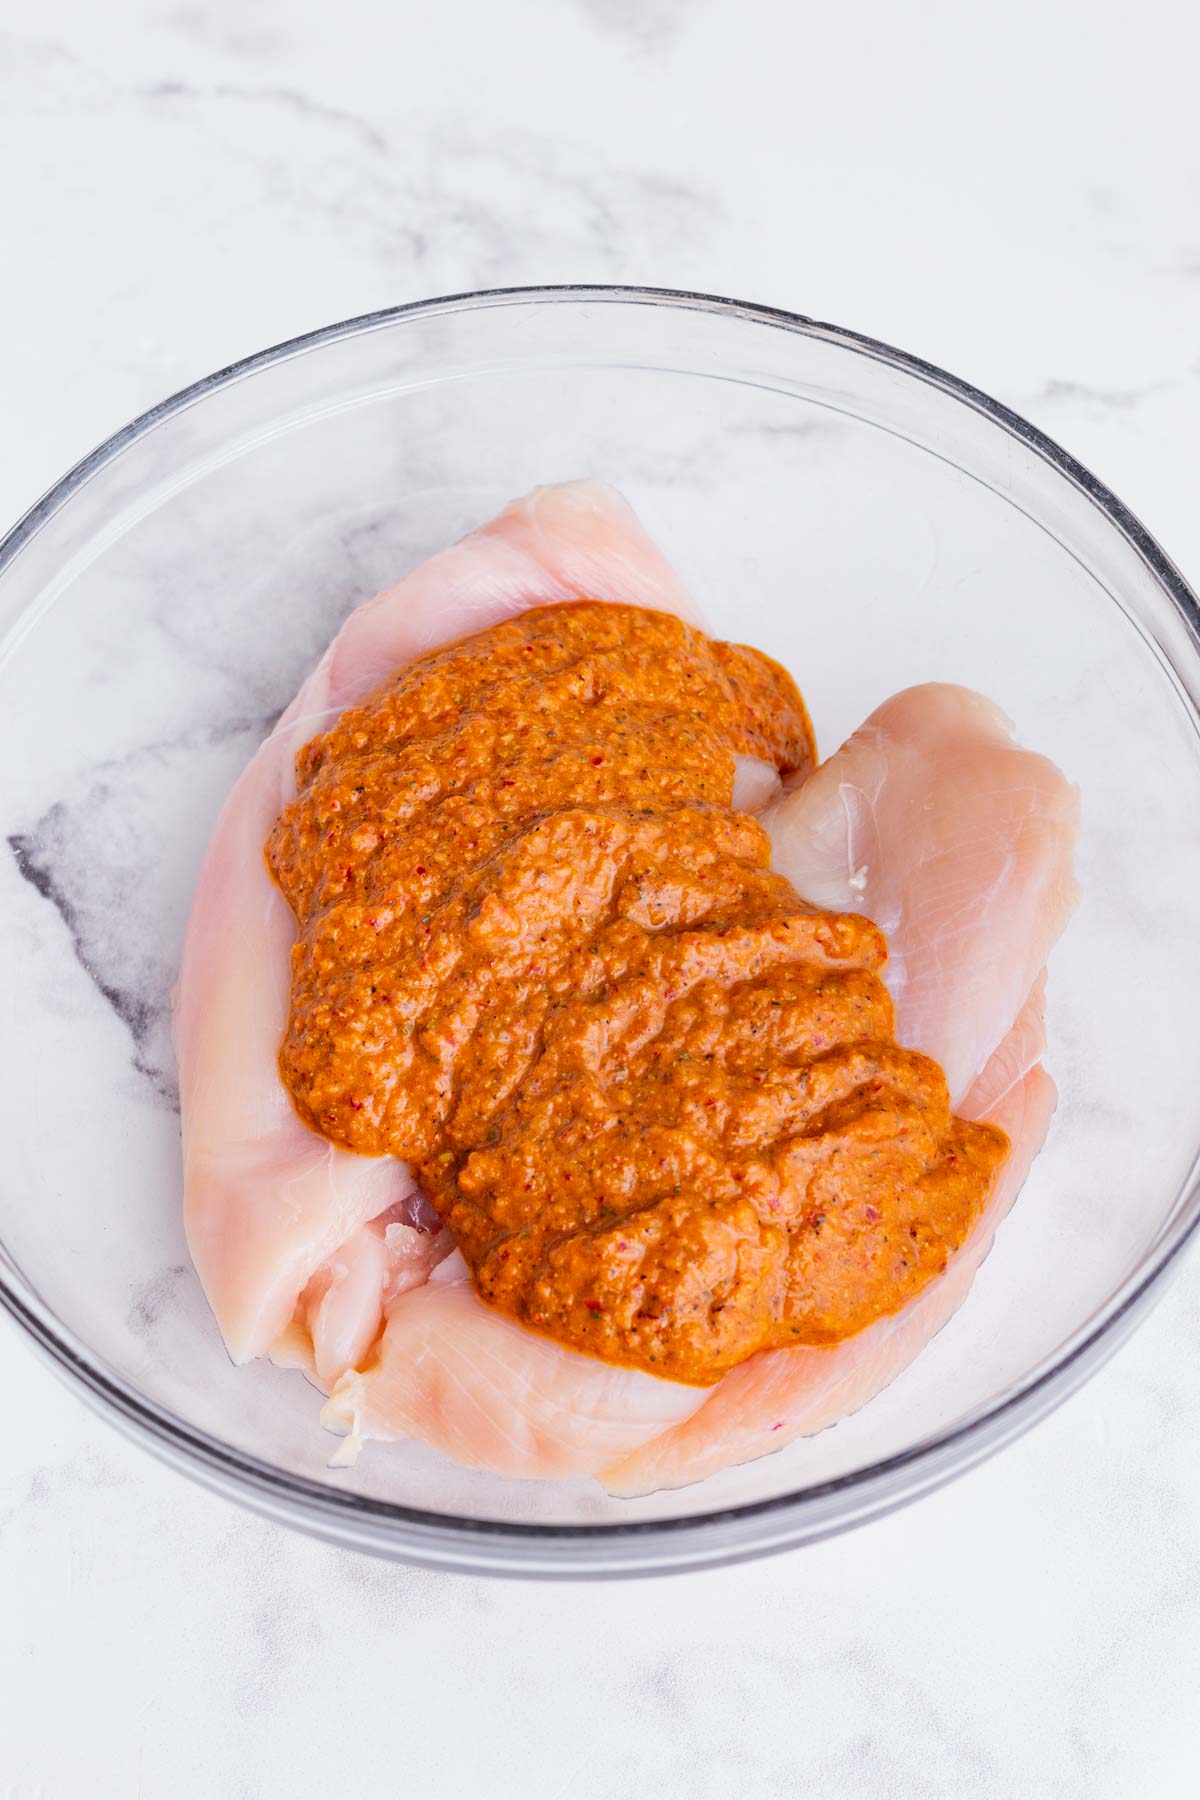 Marinade is added to chicken breasts.